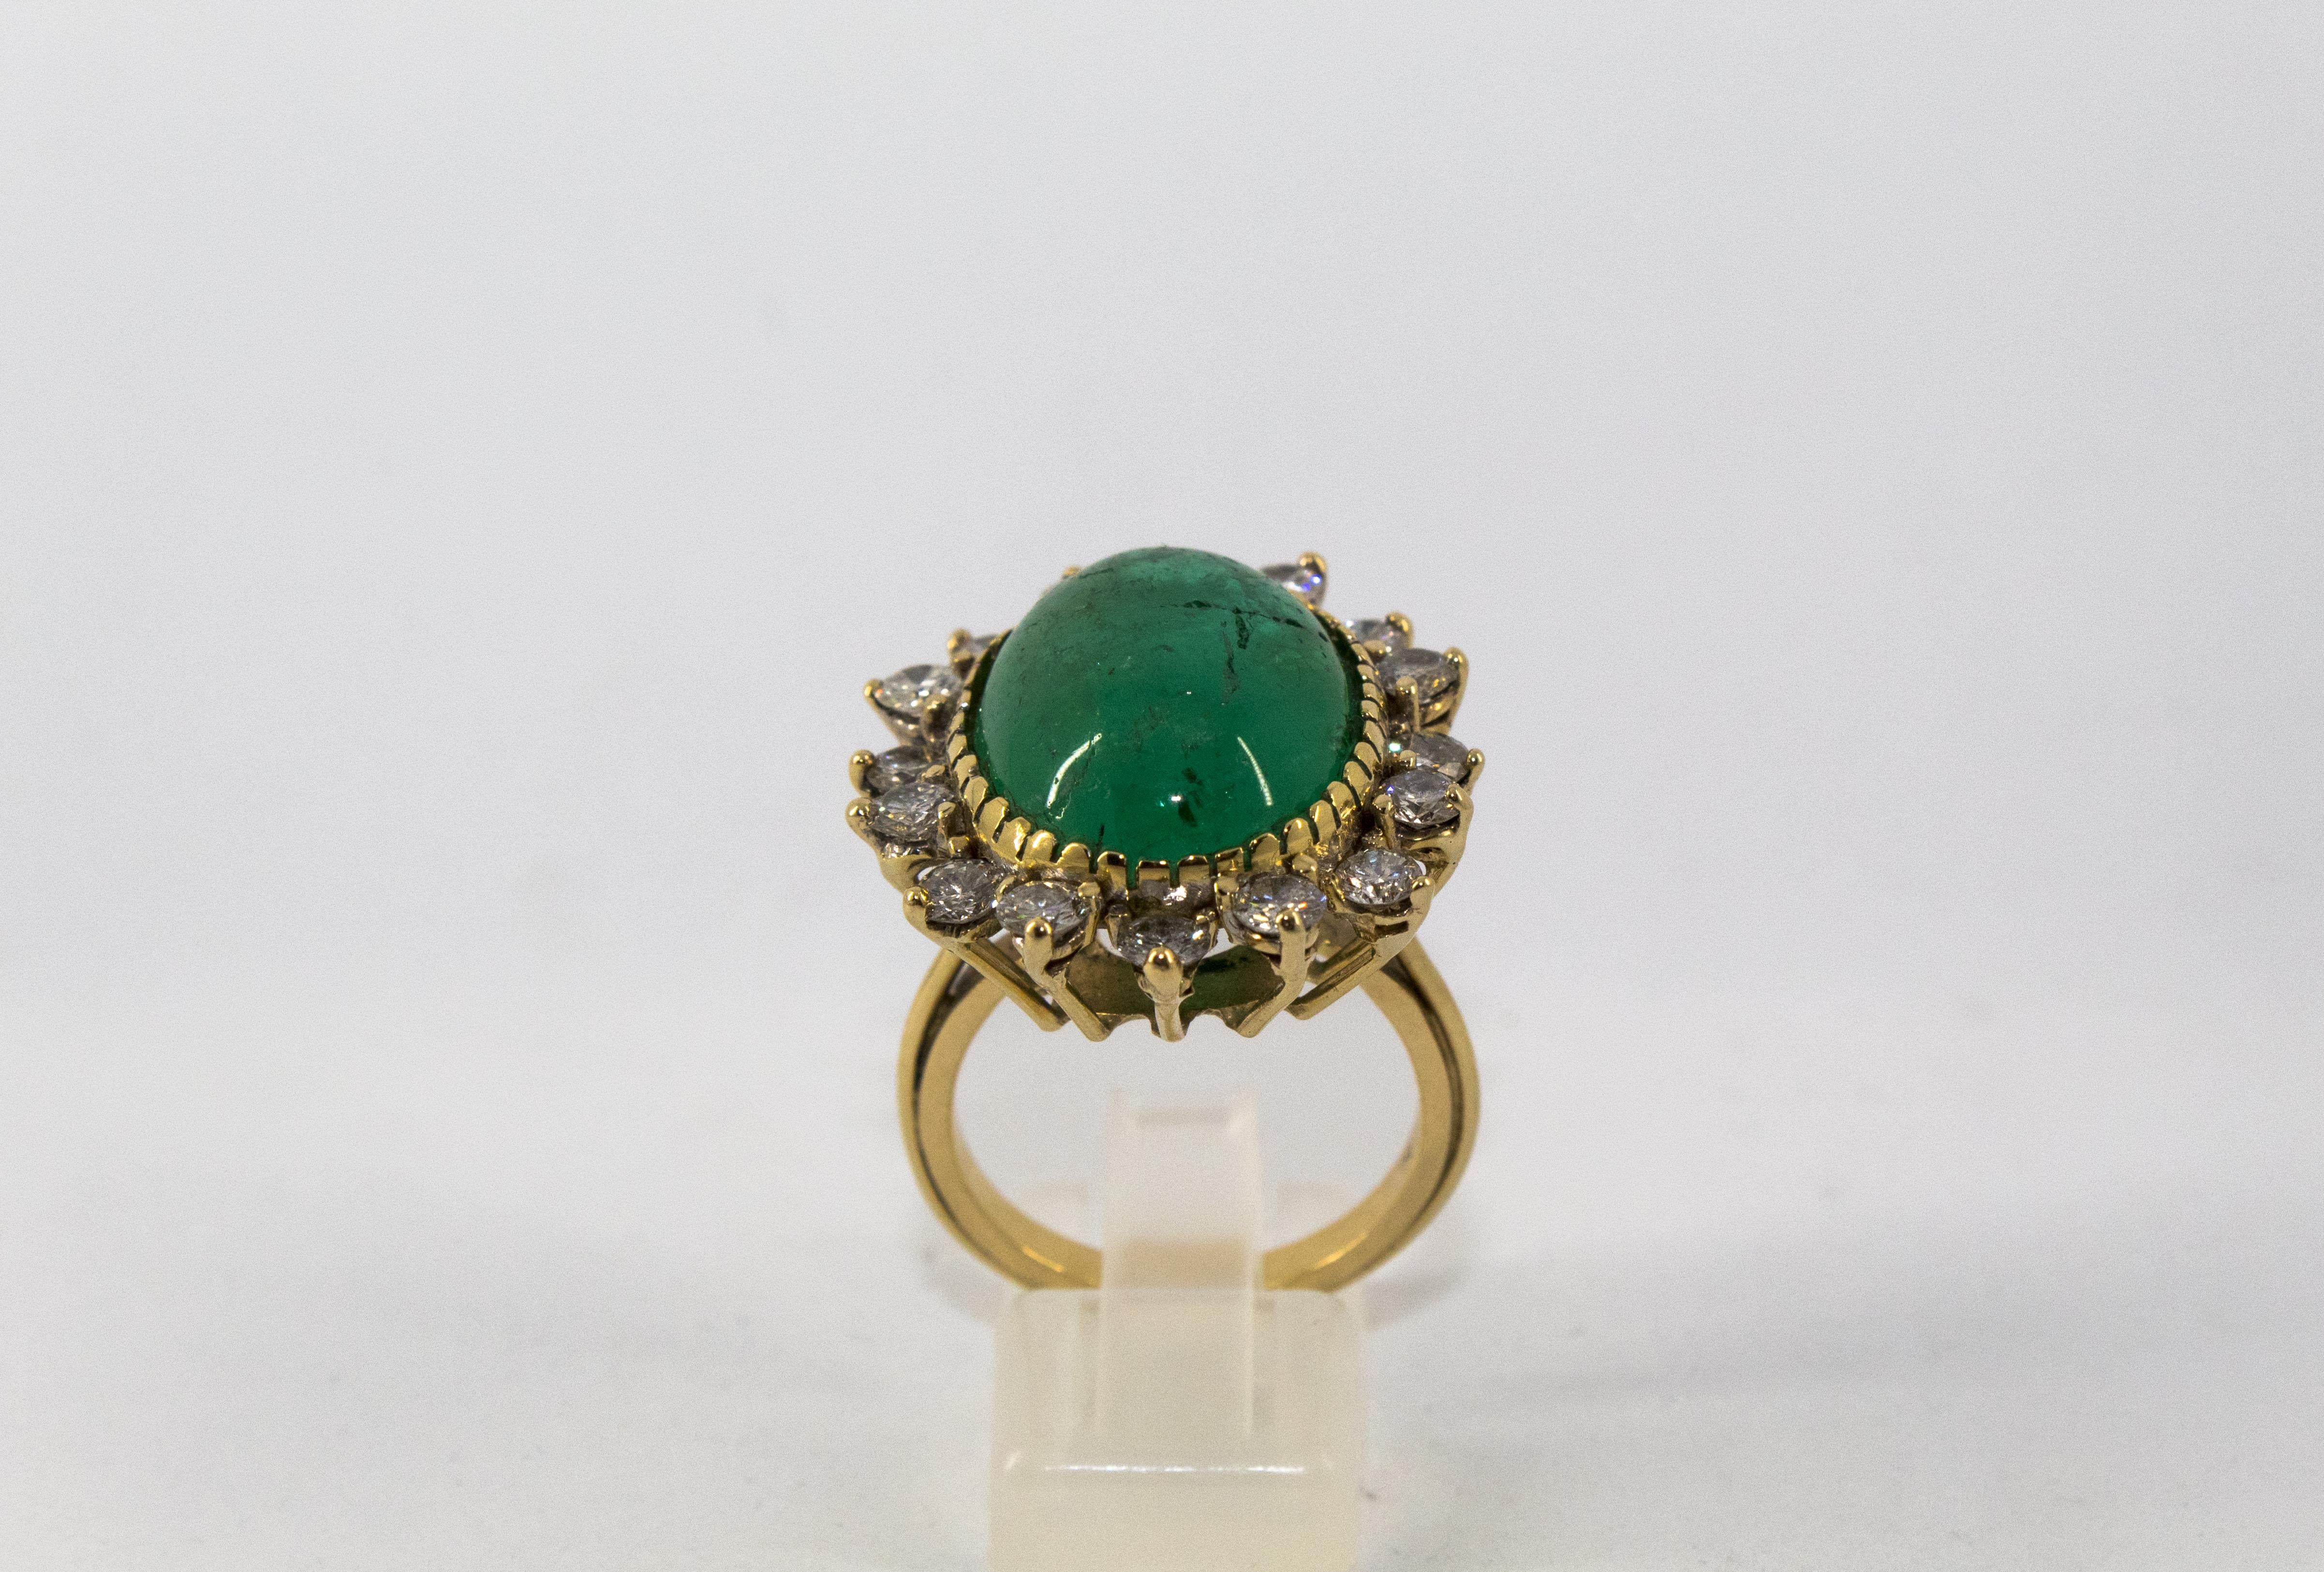 This Ring is made of 14K Yellow Gold.
This Ring has 2.80 Carats of White Diamonds (Old European Cut).
This Ring has a 16.00 Carats Zambian Emerald (Cabochon Cut).
Size ITA: 18 USA: 8 1/4
We're a workshop so every piece is handmade, customizable and